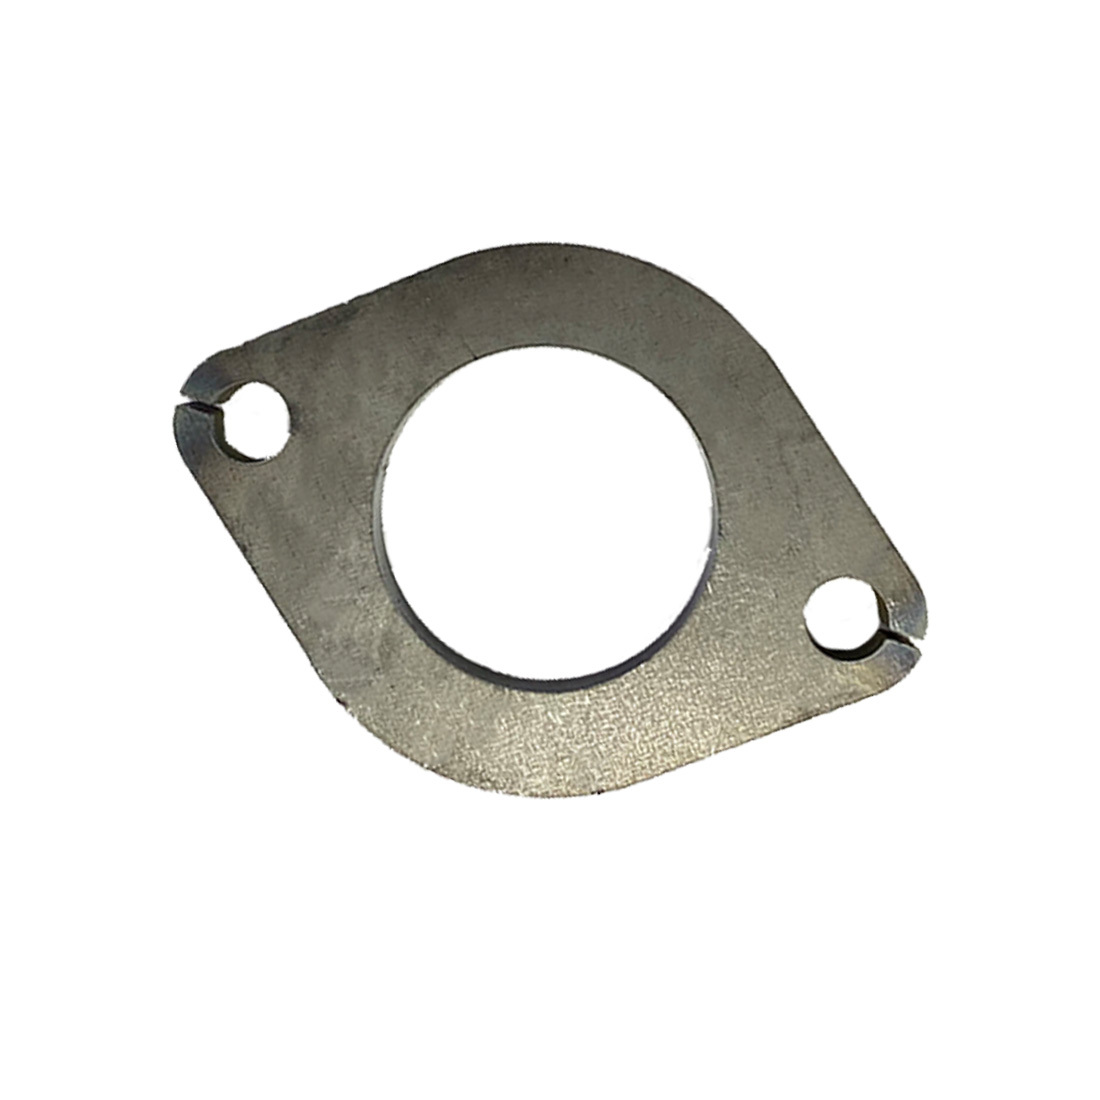 Ford Style 2 Bolt 2.25" Exhaust Laser Cut Flange Plate - Mild Steel image